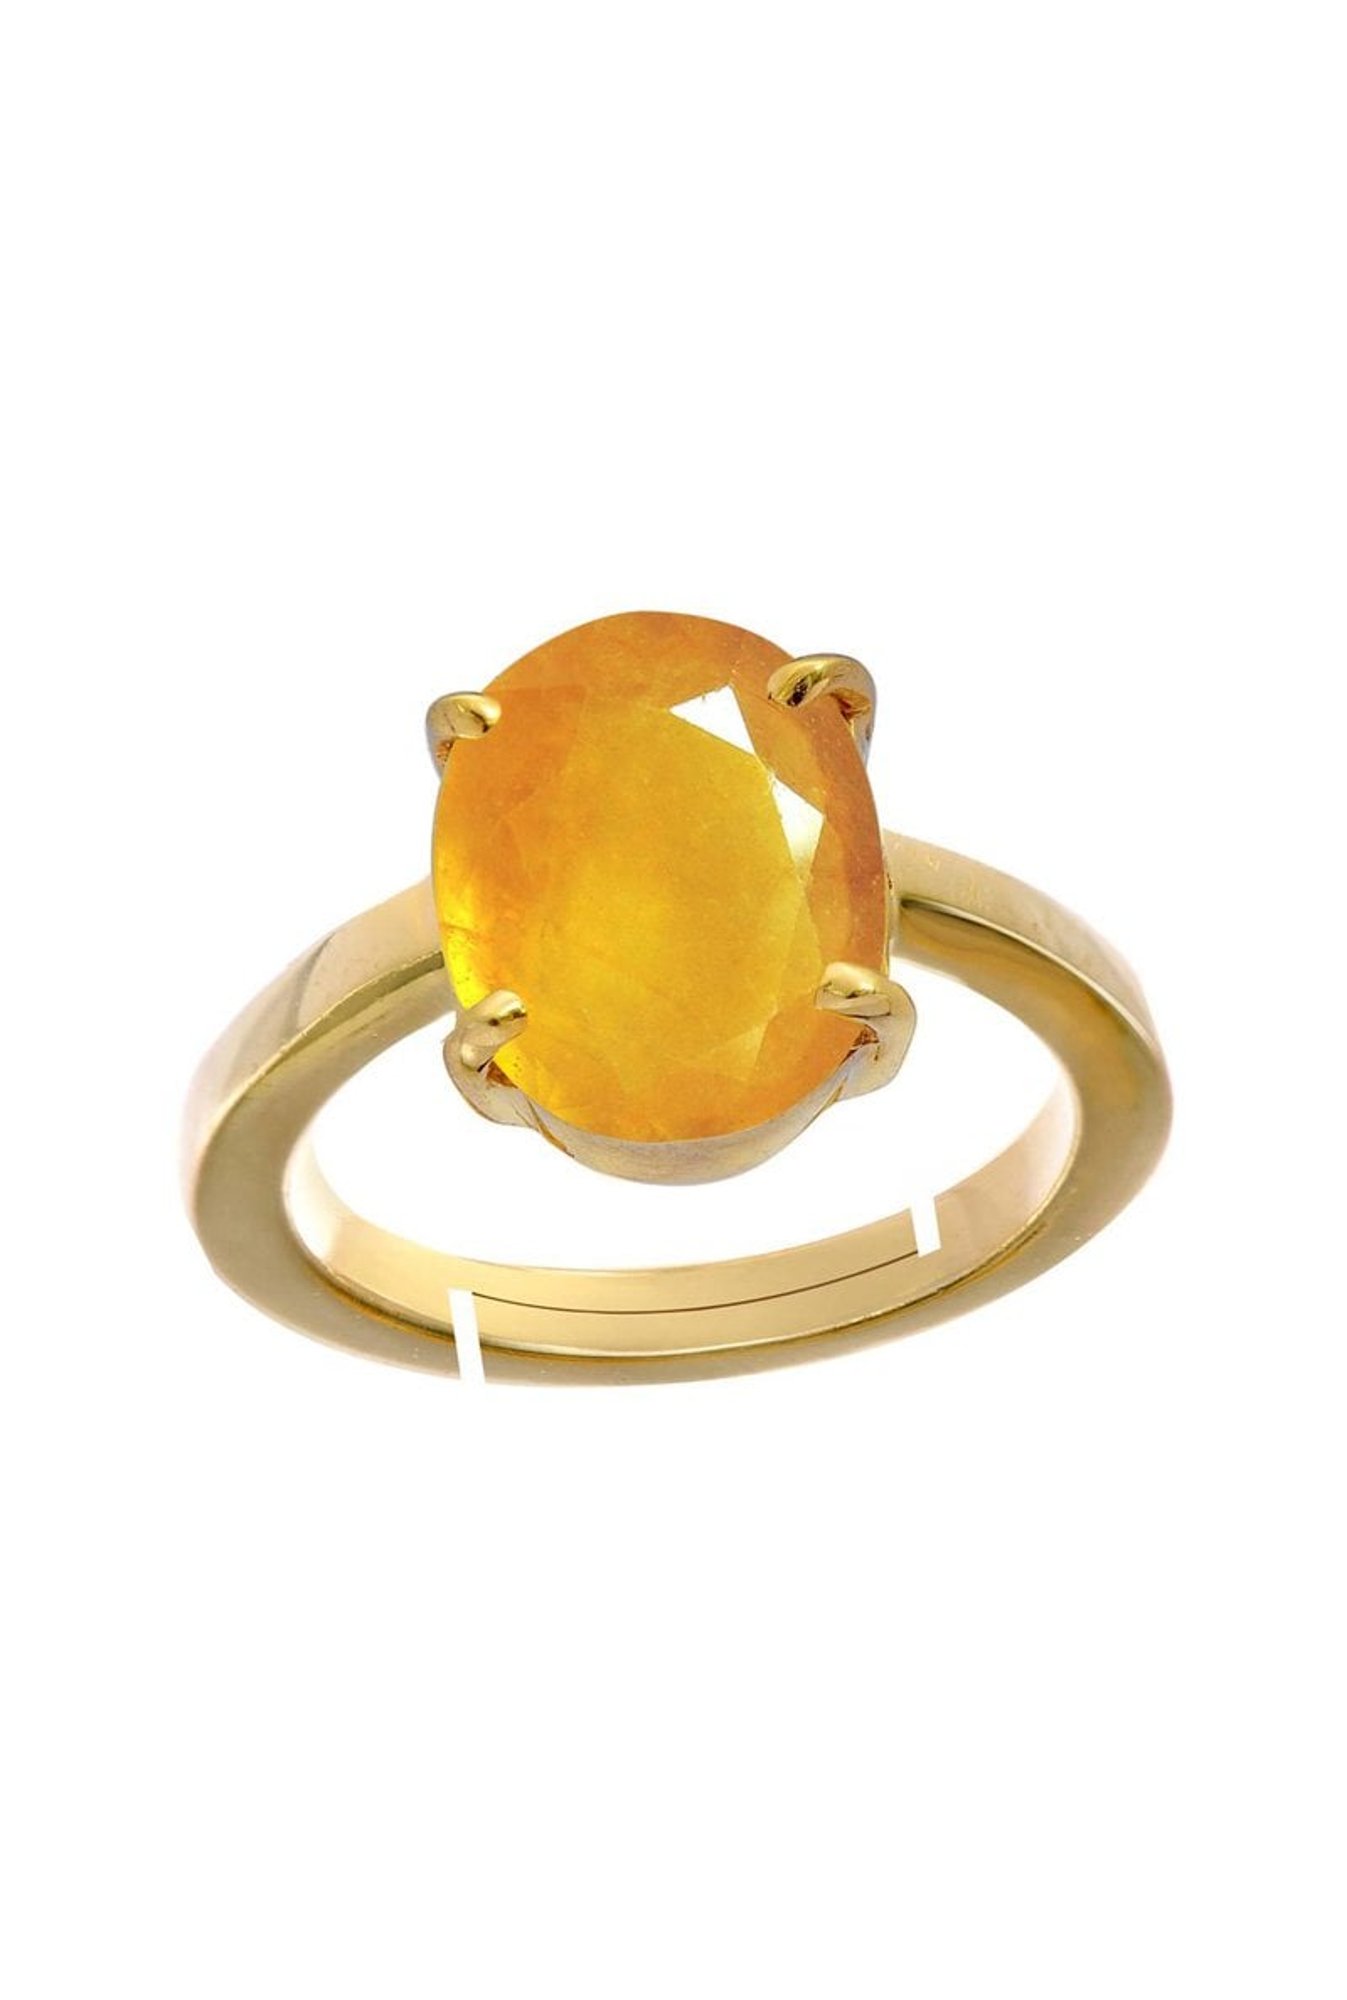 KINSHU GEMS Certified Unheated Untreatet 5.00 Ratti A+ Quality Natural Yellow  Sapphire Pukhraj Gemstone Gold Plated Ring for Women's and Men's :  Amazon.in: Fashion